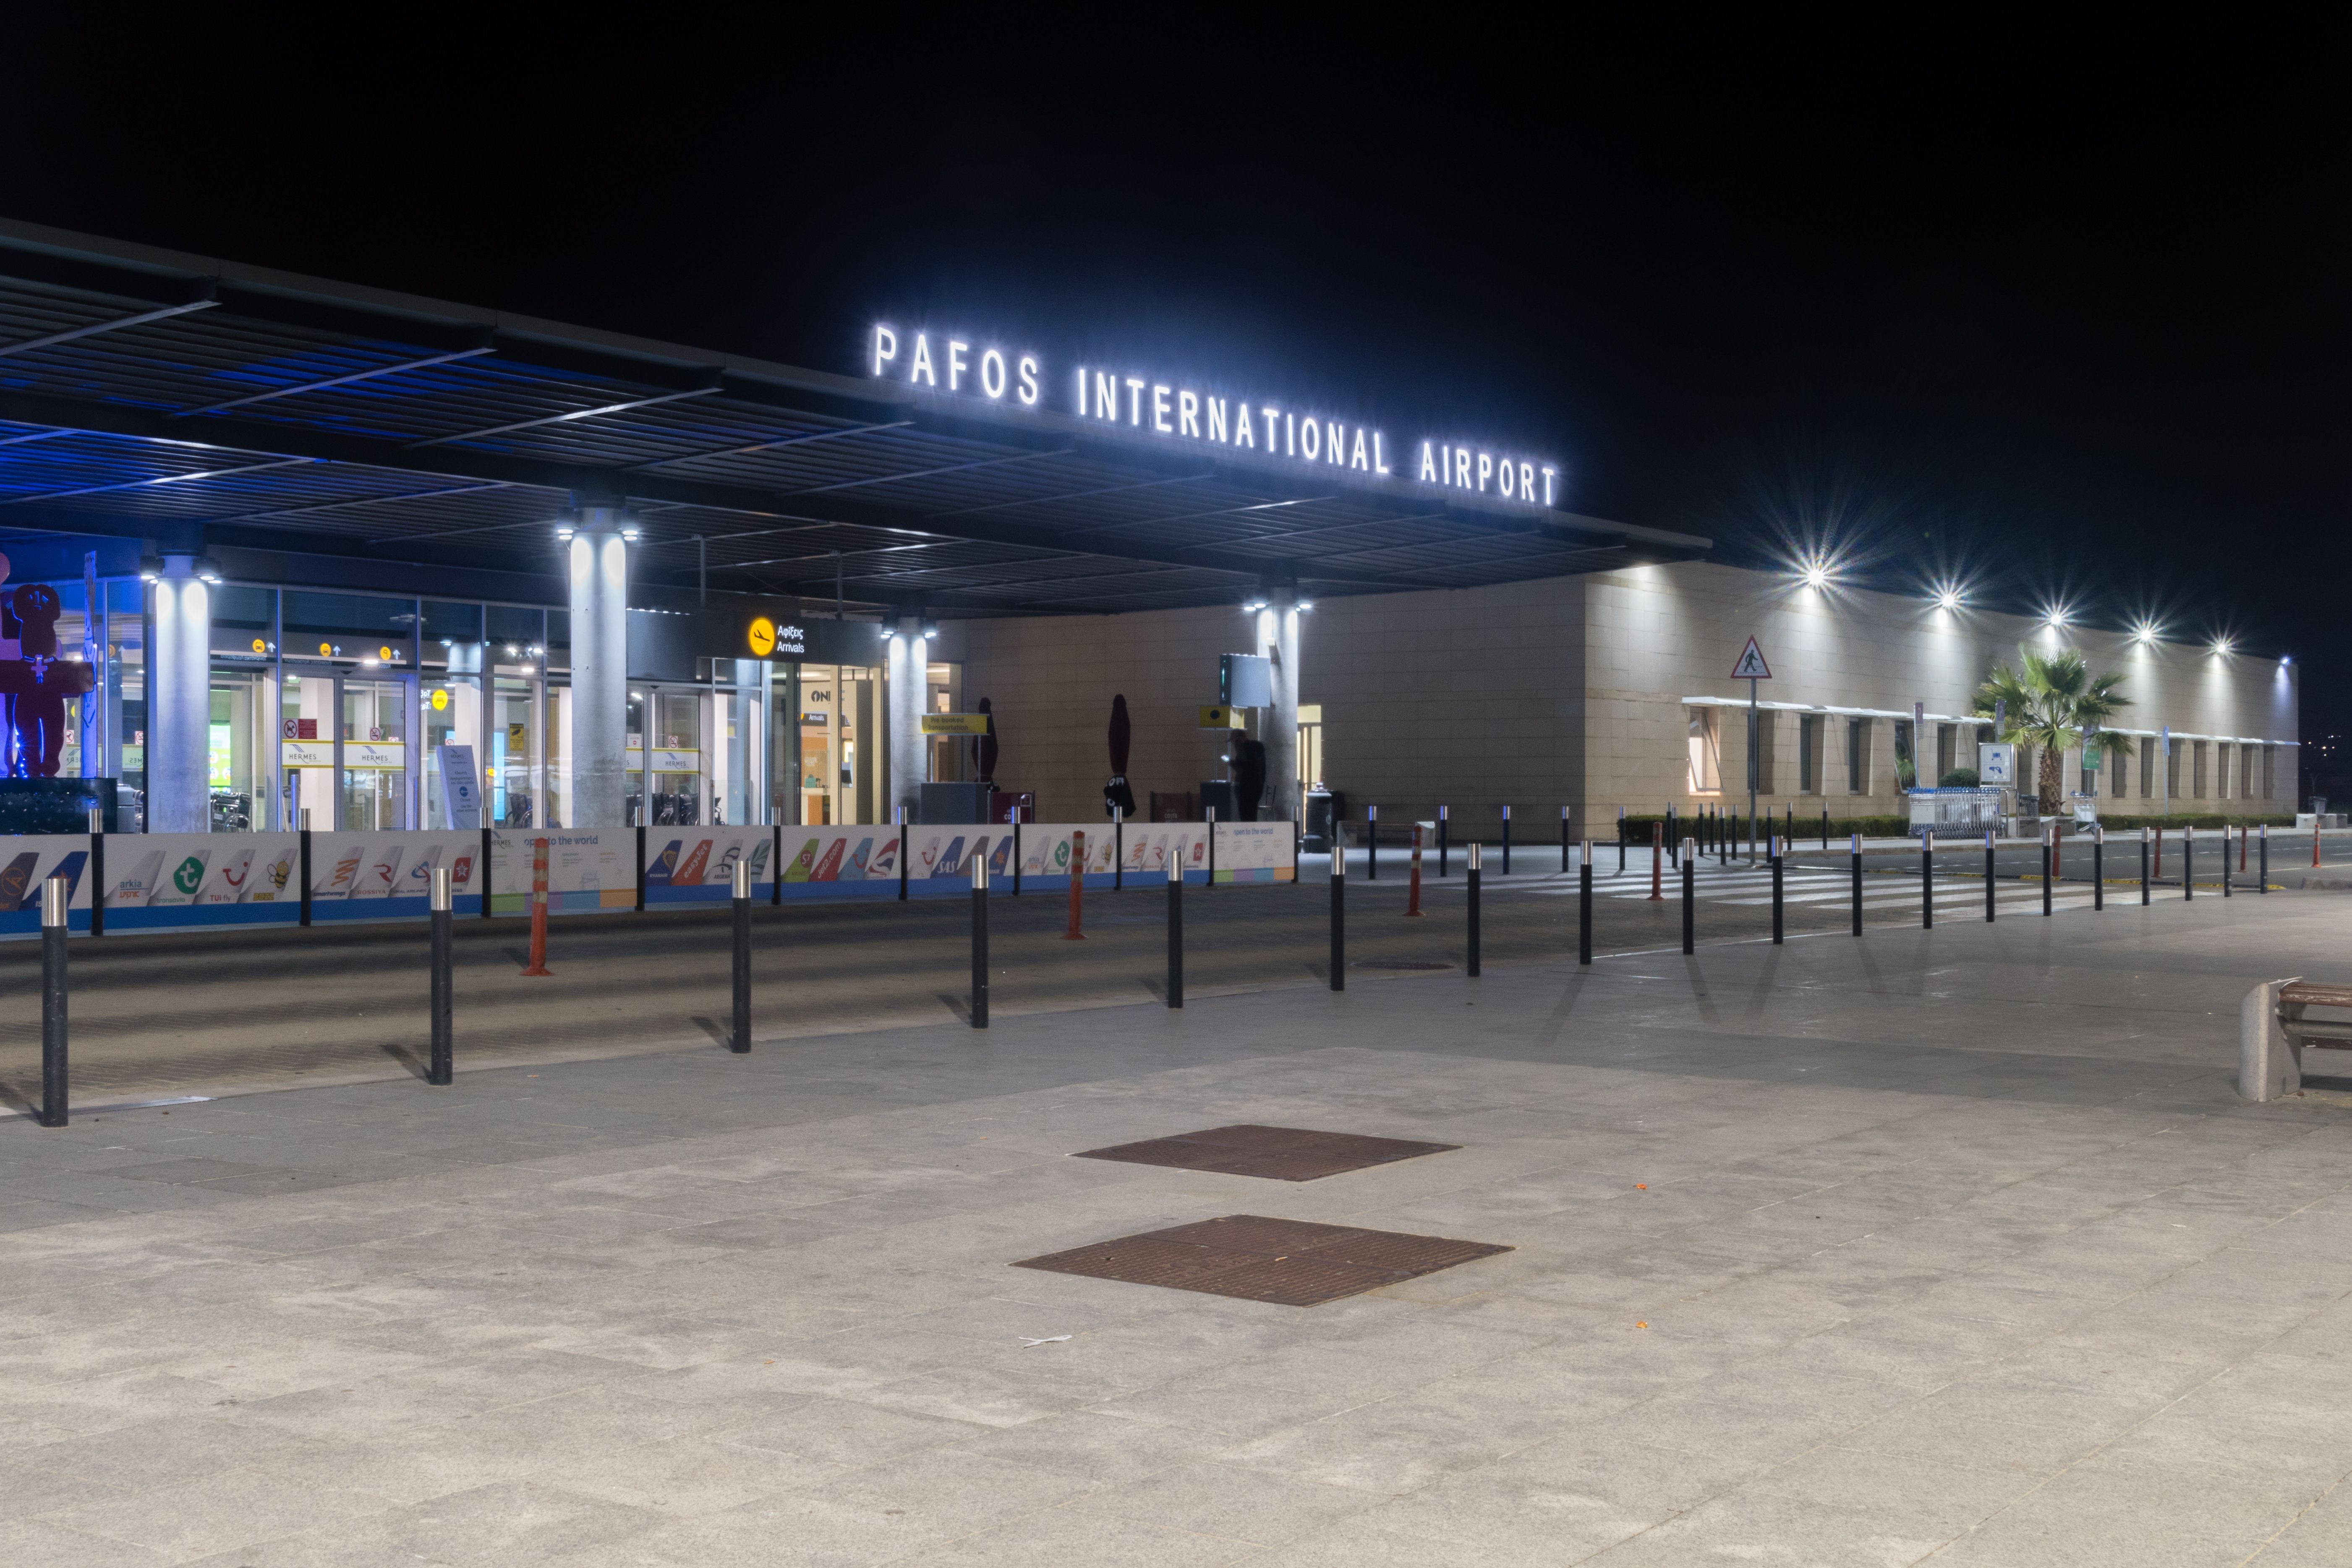 The Paphos Airport Entrance At Night.